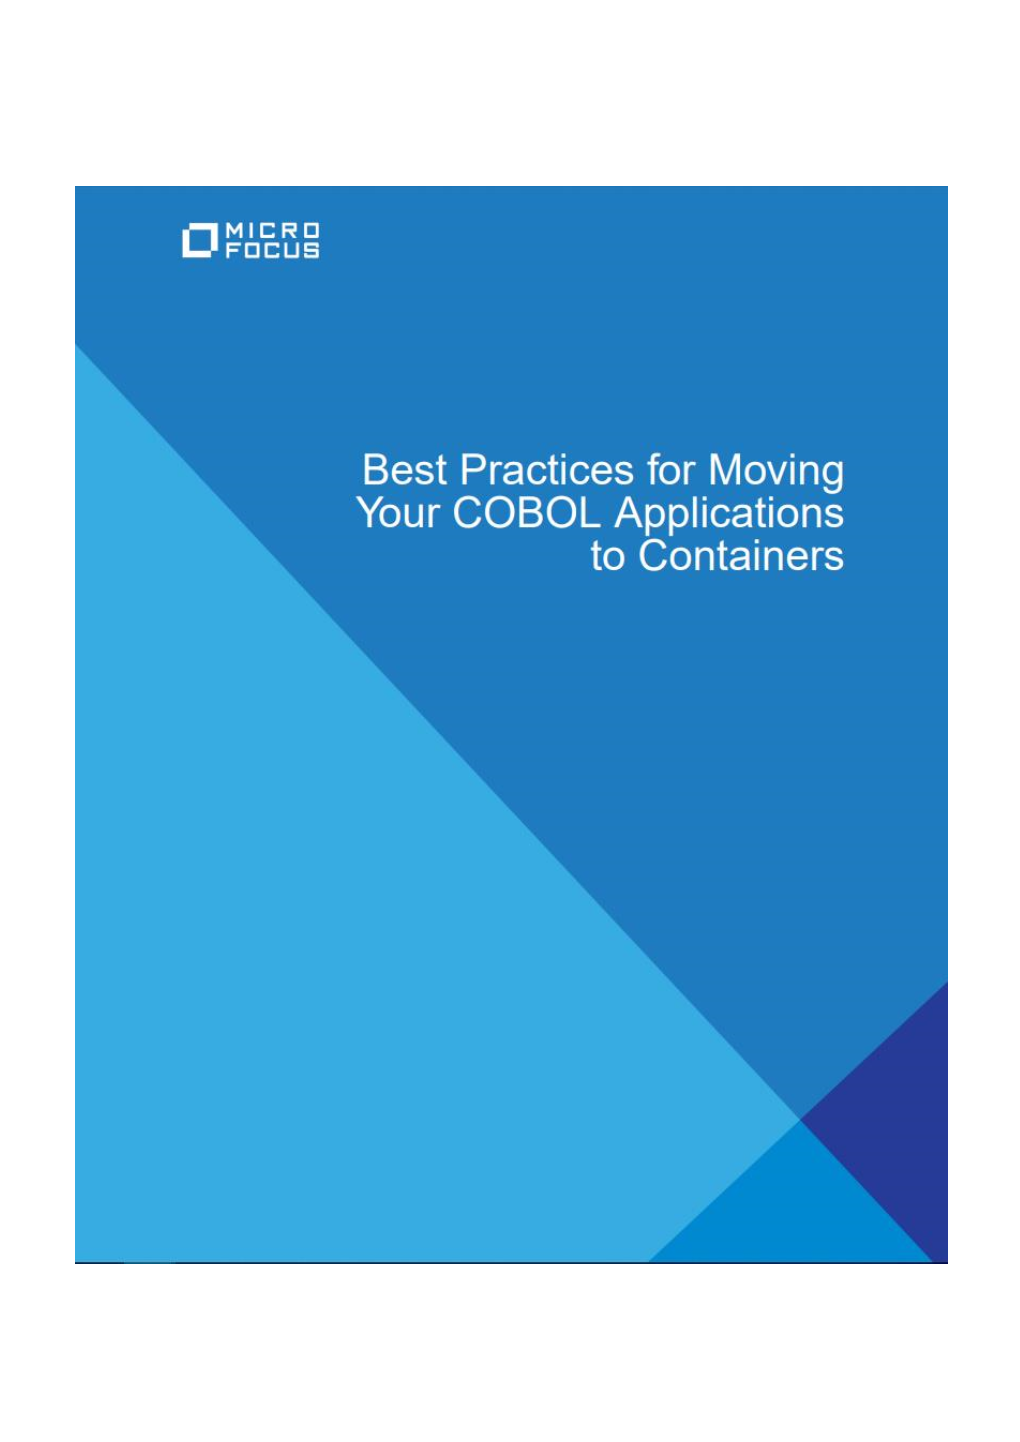 Best Practices for Moving Your COBOL Applications to Containers